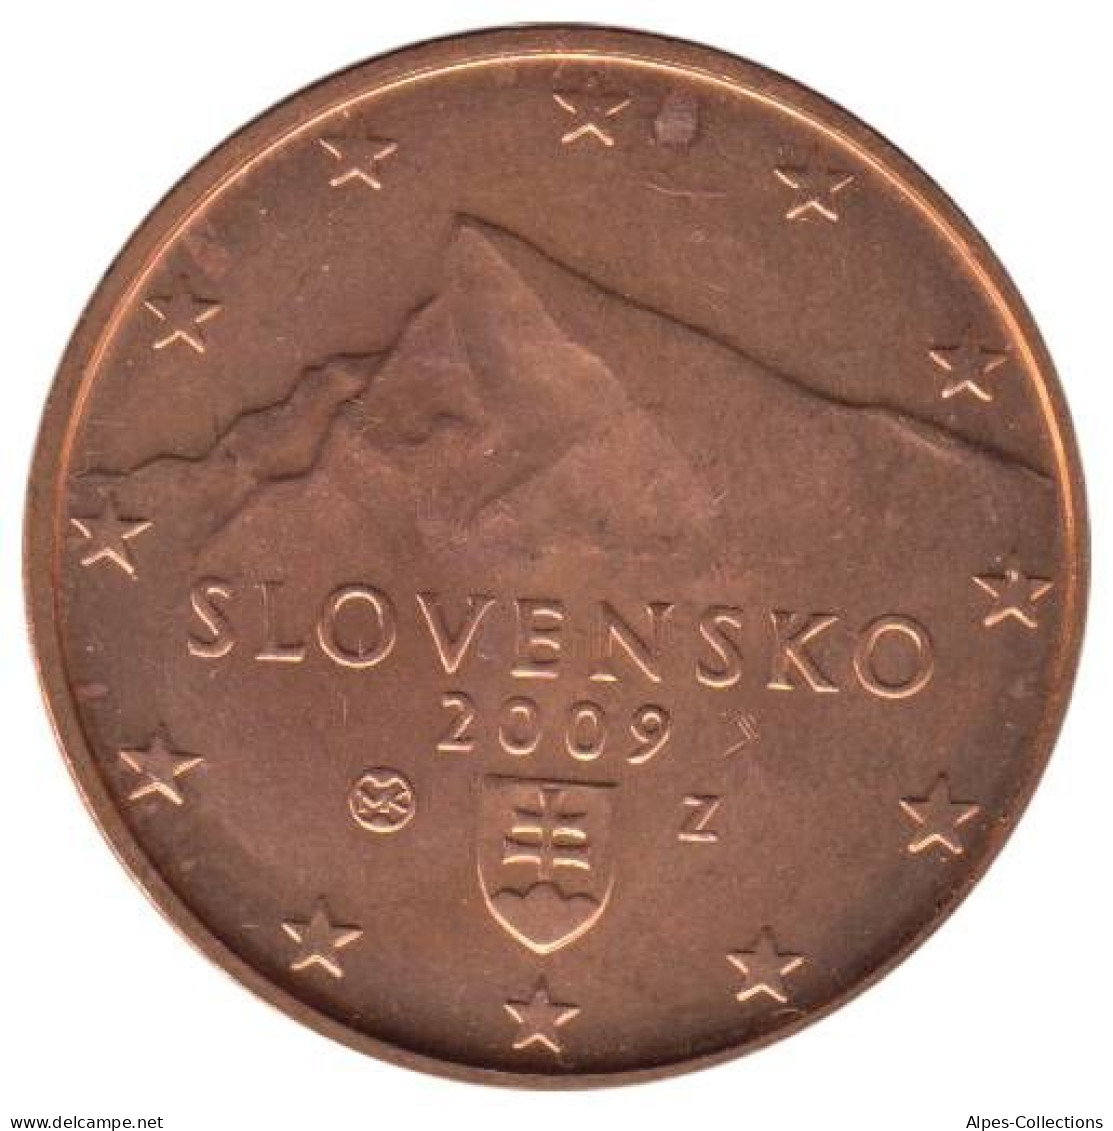 SQ00509.1 - SLOVAQUIE - 5 Cents - 2009 - Slovaquie